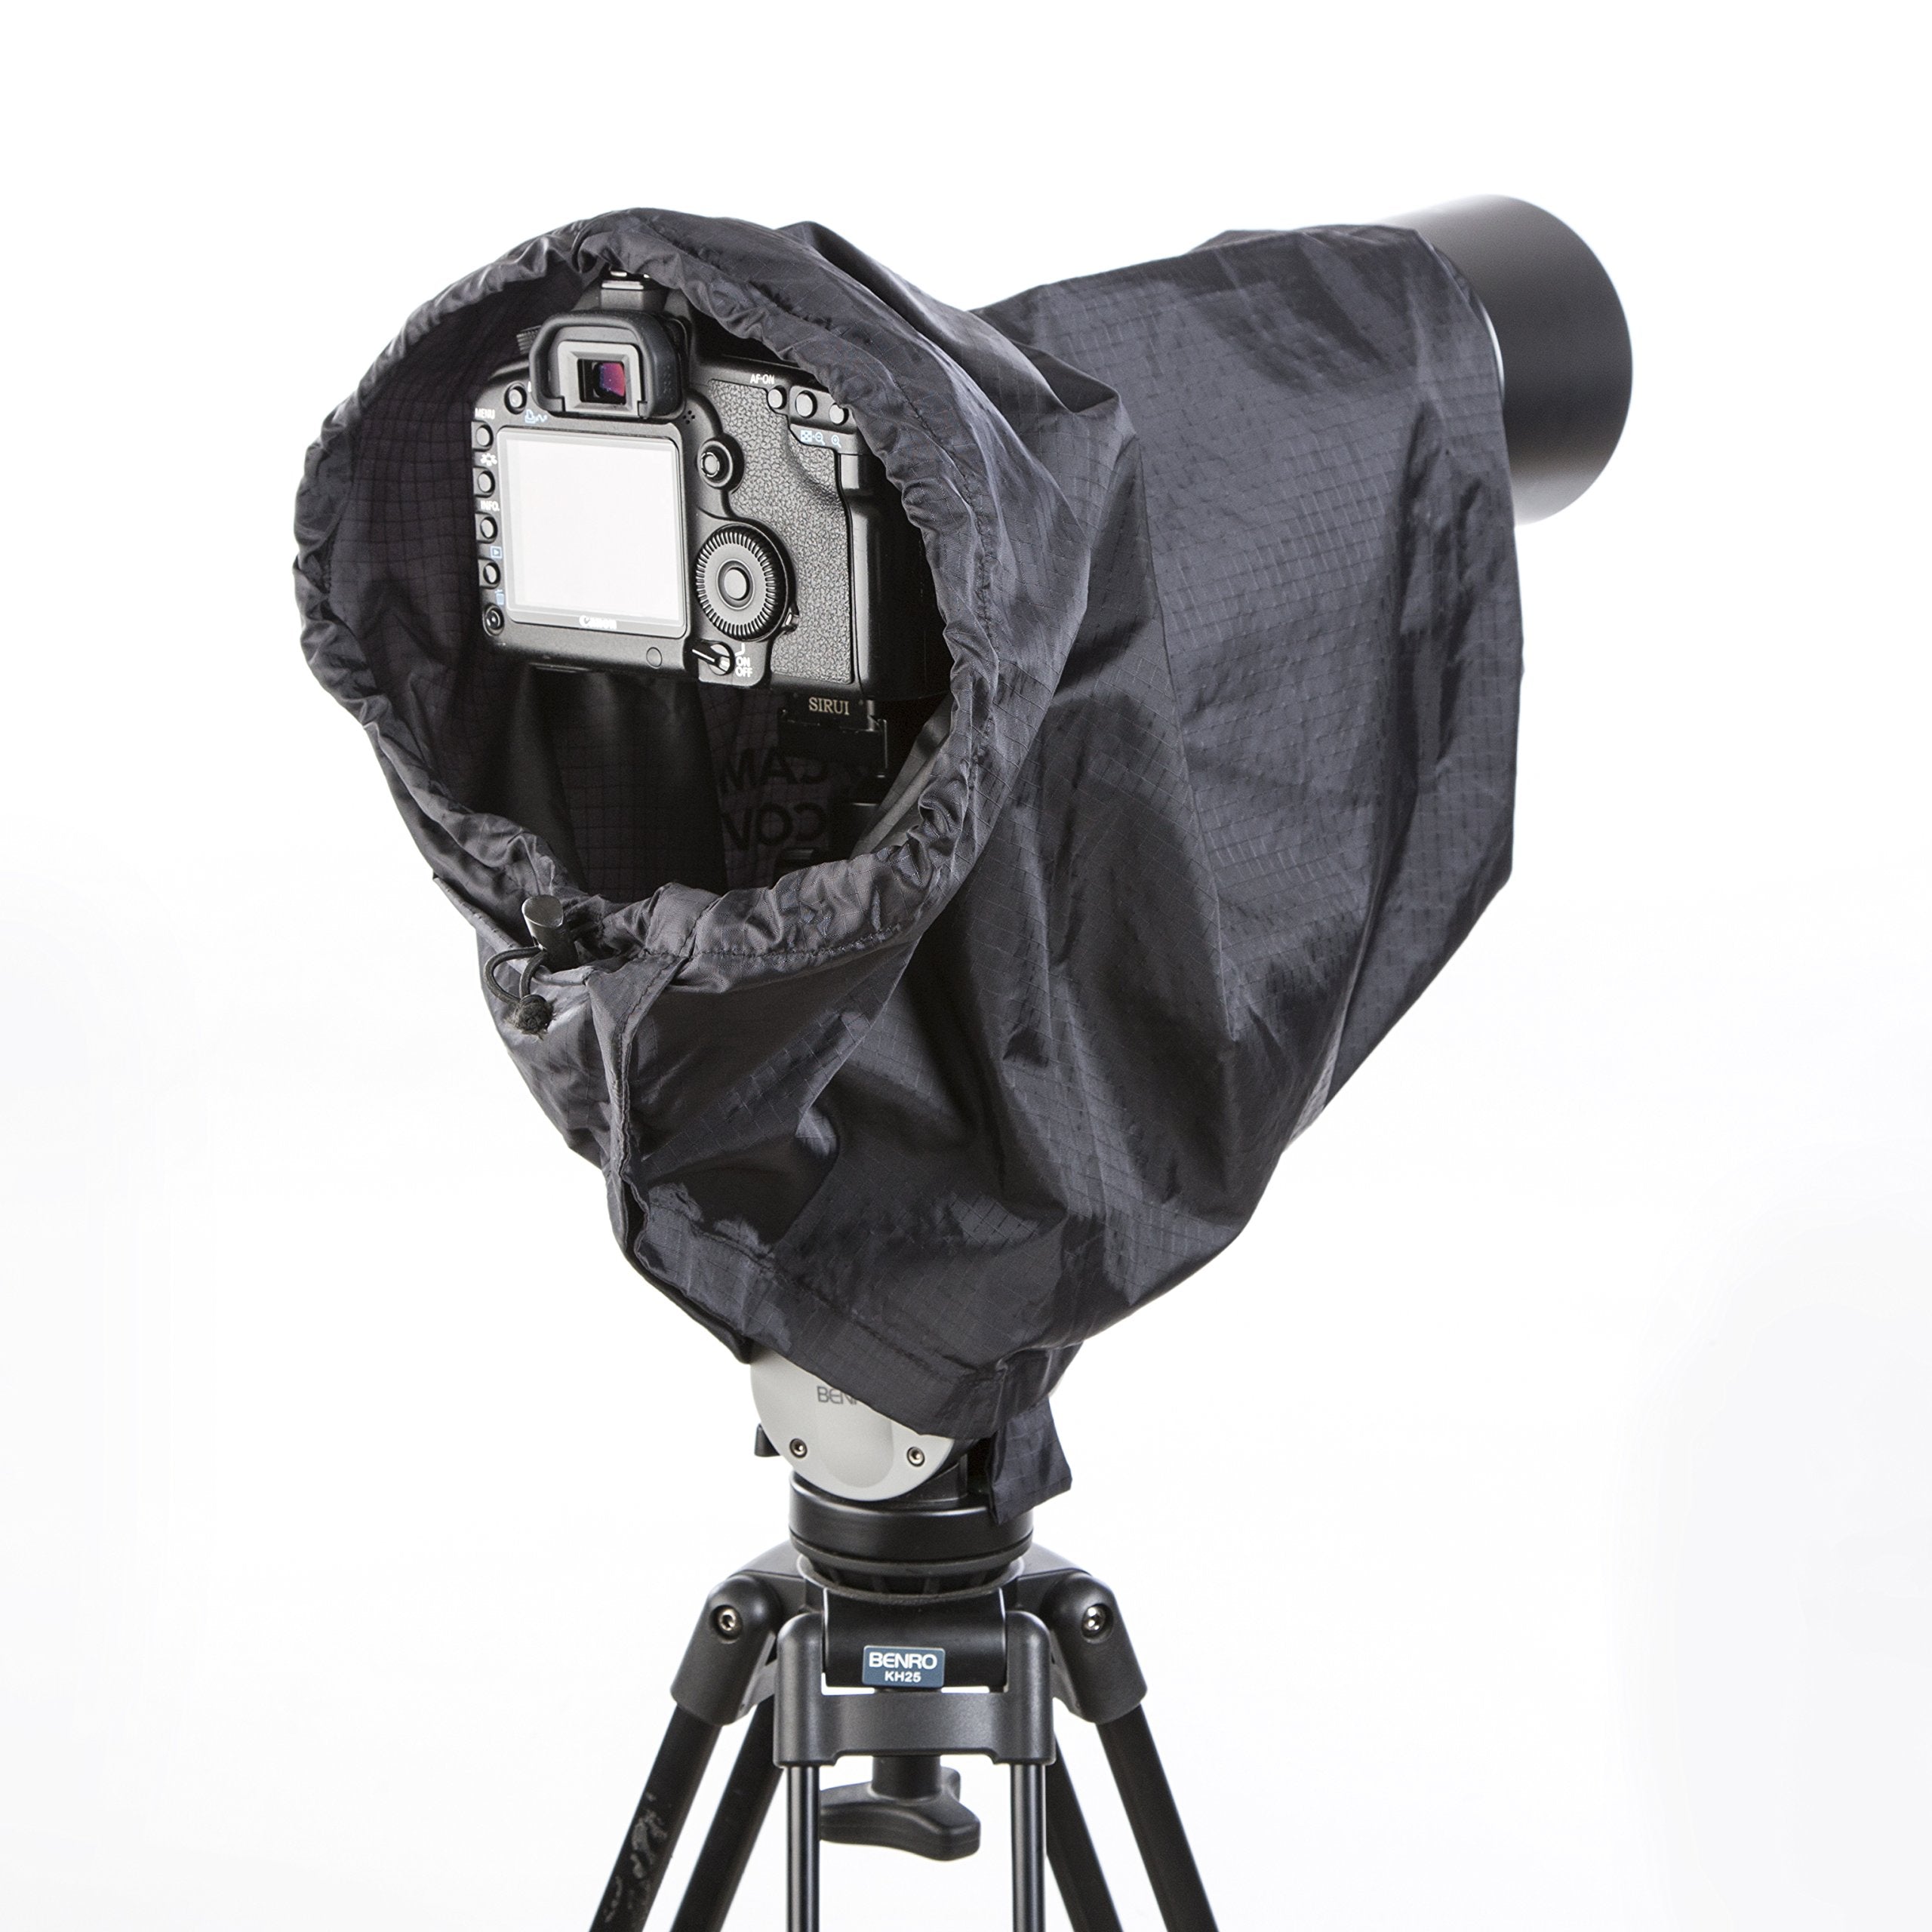 Movo CRC23 Storm Raincover Protector for DSLR Cameras, Lenses, Photographic Equipment (Medium Size: 23 x 14.5)  - Very Good